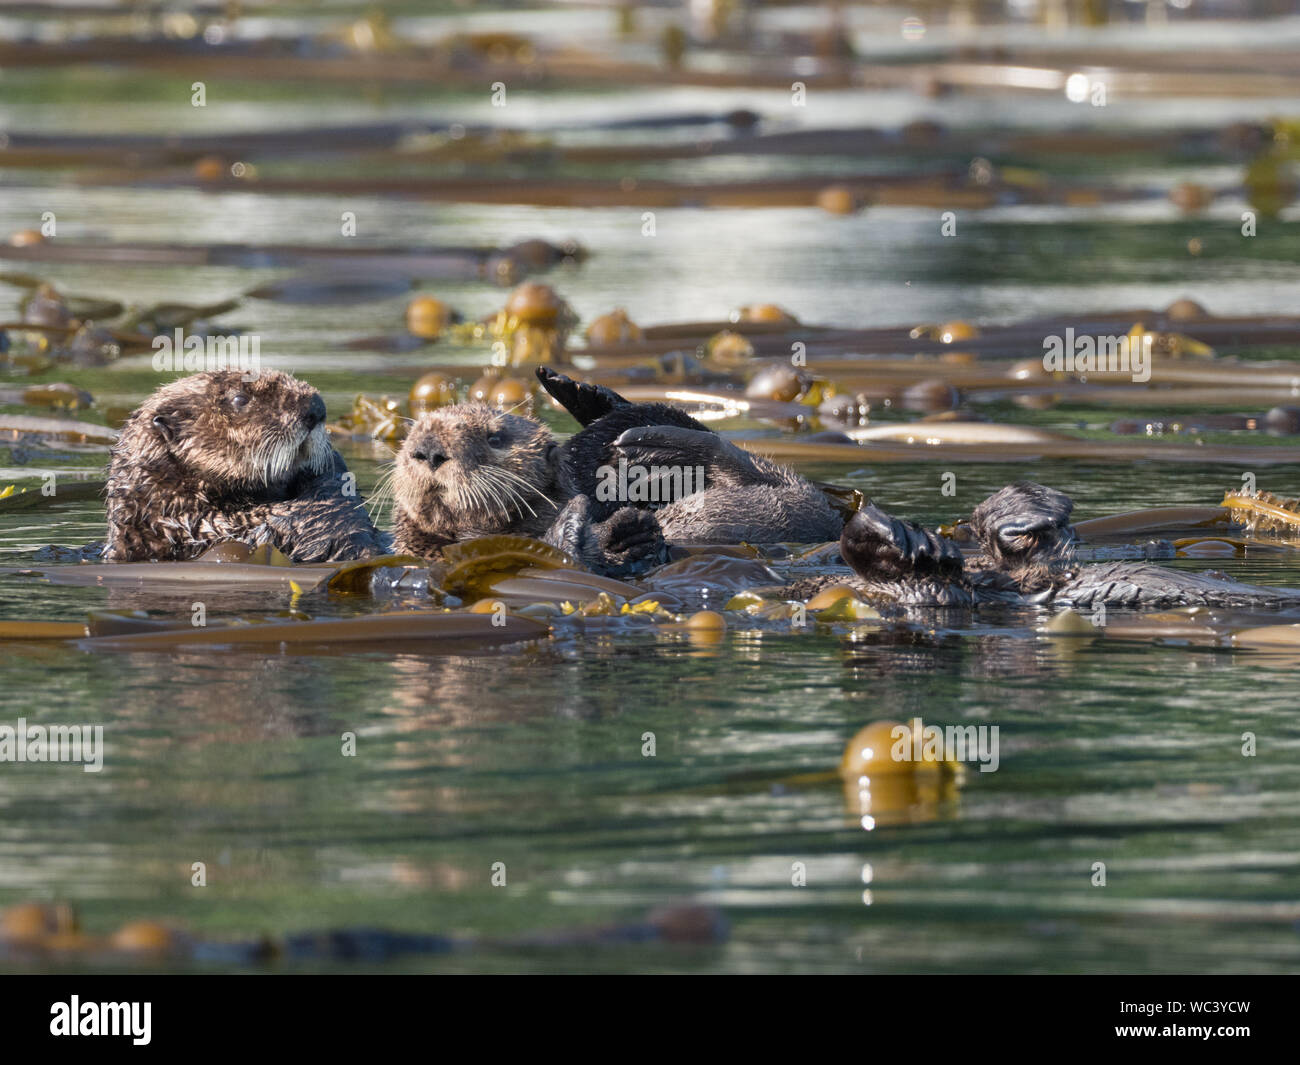 Sea otters, Enhydra lutris, a marine mammal in the weasel family in a kelp forest in Southeast Alaska Stock Photo